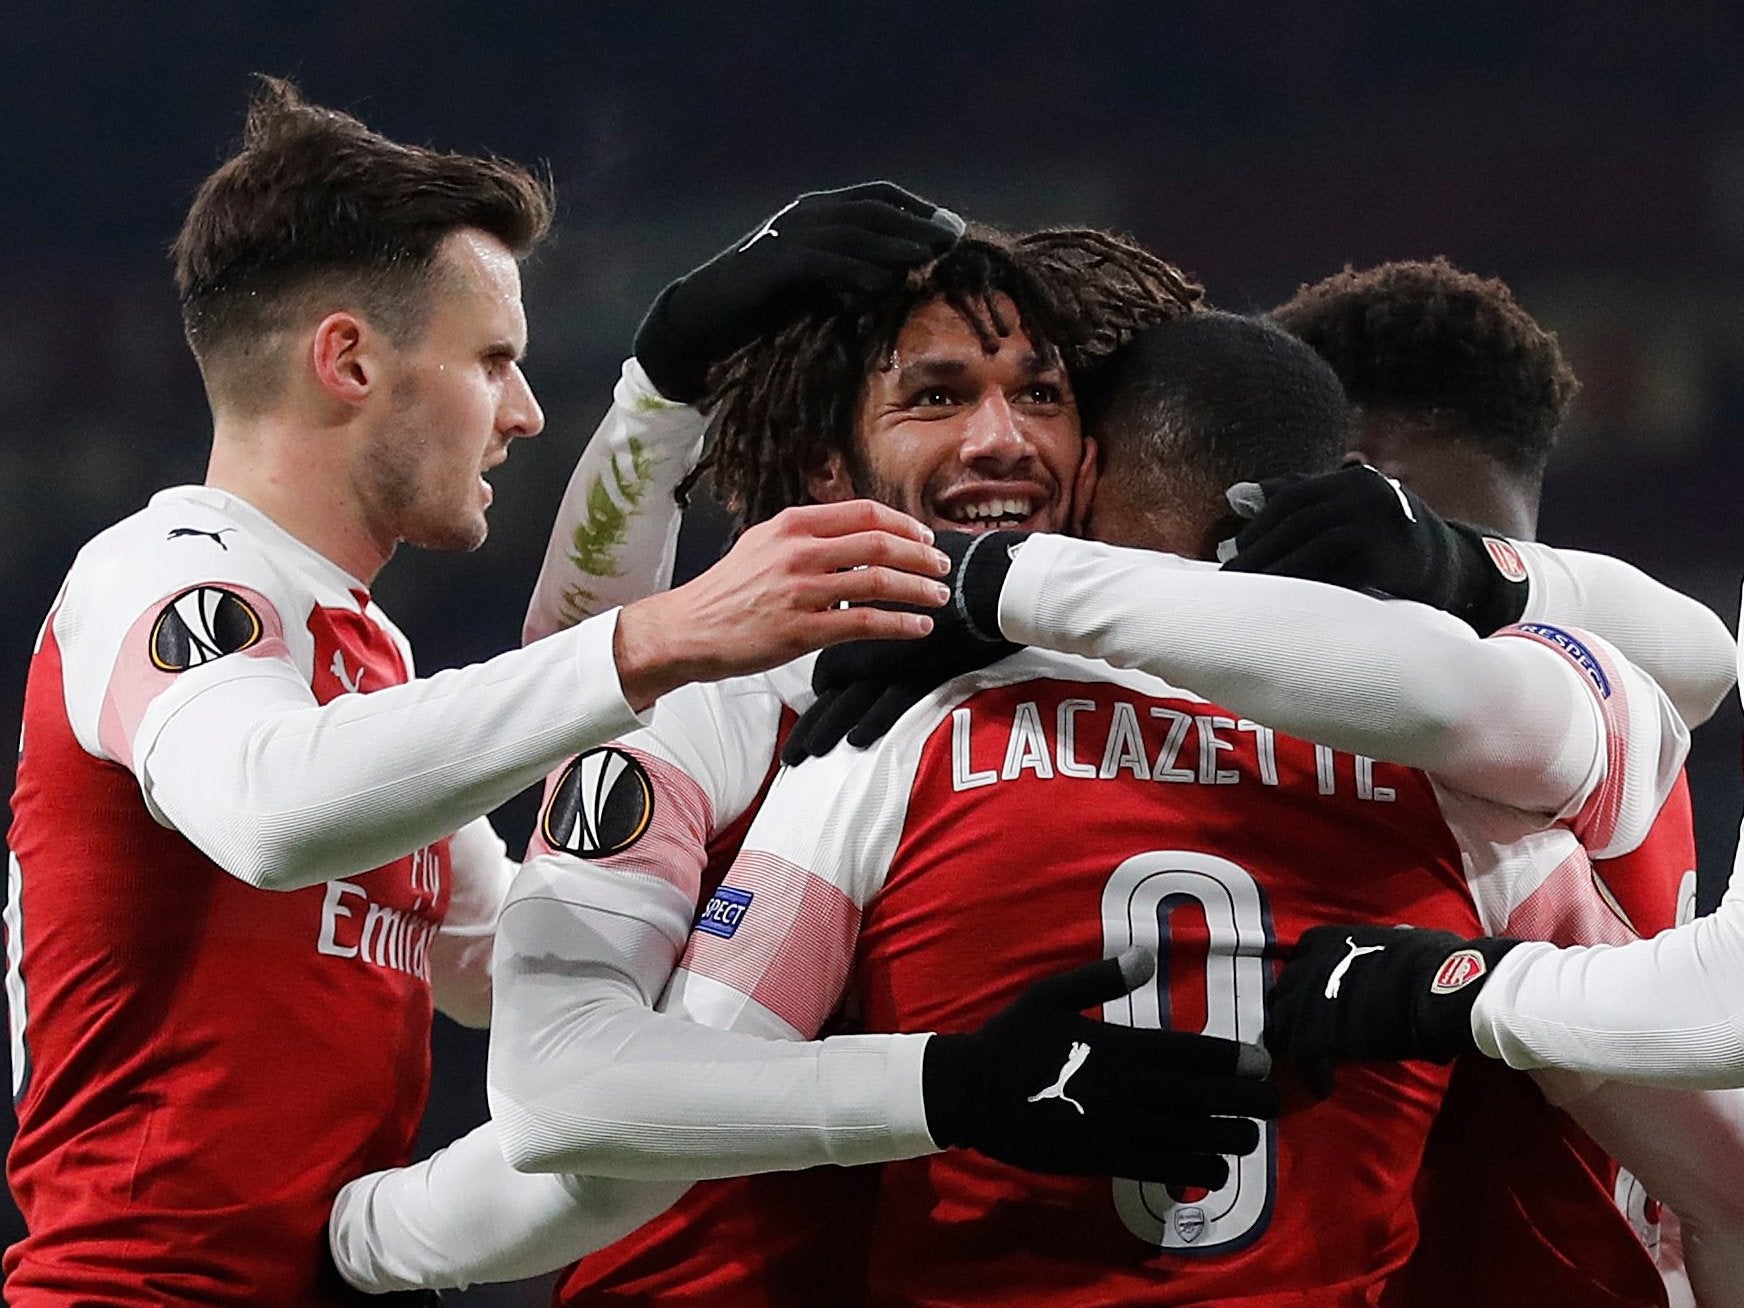 Arsenal's young side made light work of their opposition